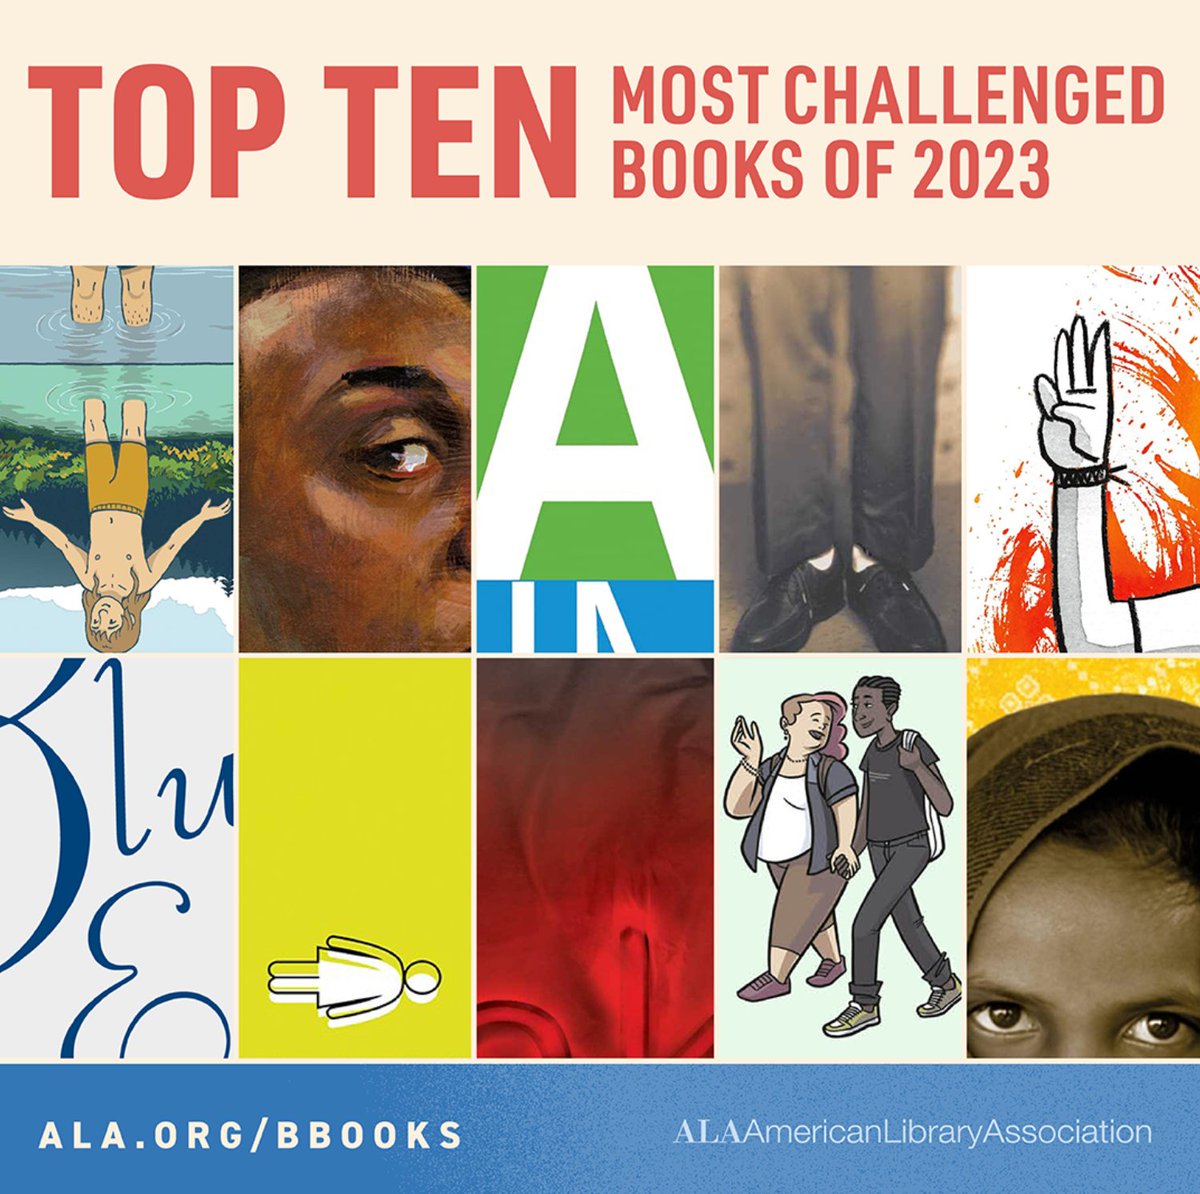 American Library Association (ALA) Releases Annual List of the Top 10 Most Challenged #Books of 2023 ow.ly/Z4re50RaksP #libraries #reading #bookbans